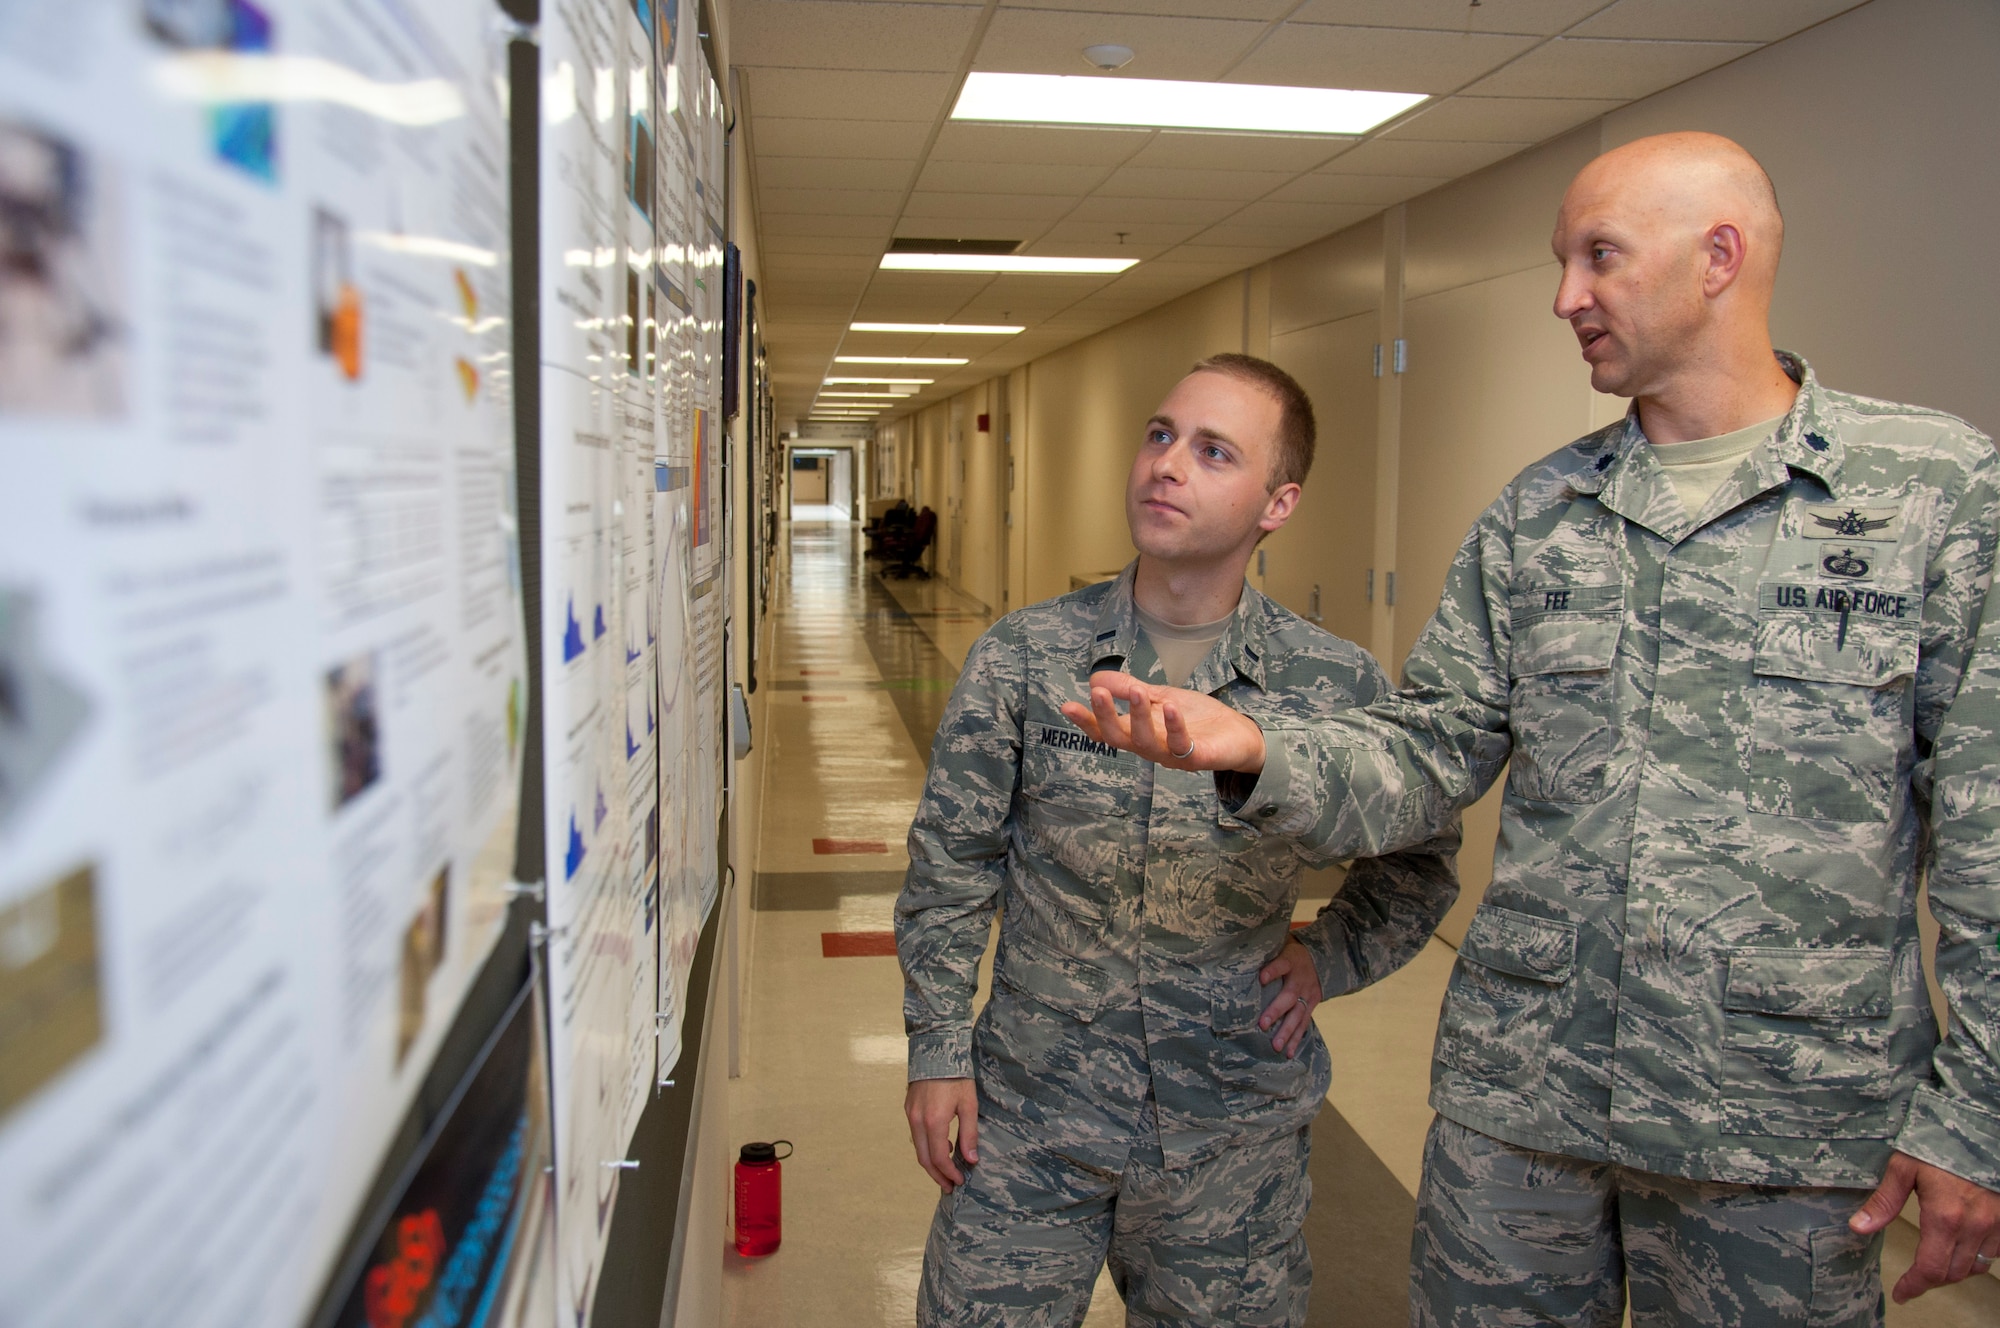 WRIGHT-PATTERSON AIR FORCE BASE, Ohio – Lt. Col. James Fee, Air Force Institute of Technology assistant professor of nuclear engineering, discusses electromagnetic pulse and how to model it from a nuclear weapon with 1st. Lt. Cameron Merriman, an AFIT student, June 22 using a display board hung in one of AFIT’s corridors. (U.S. Air Force photo/John Harrington)